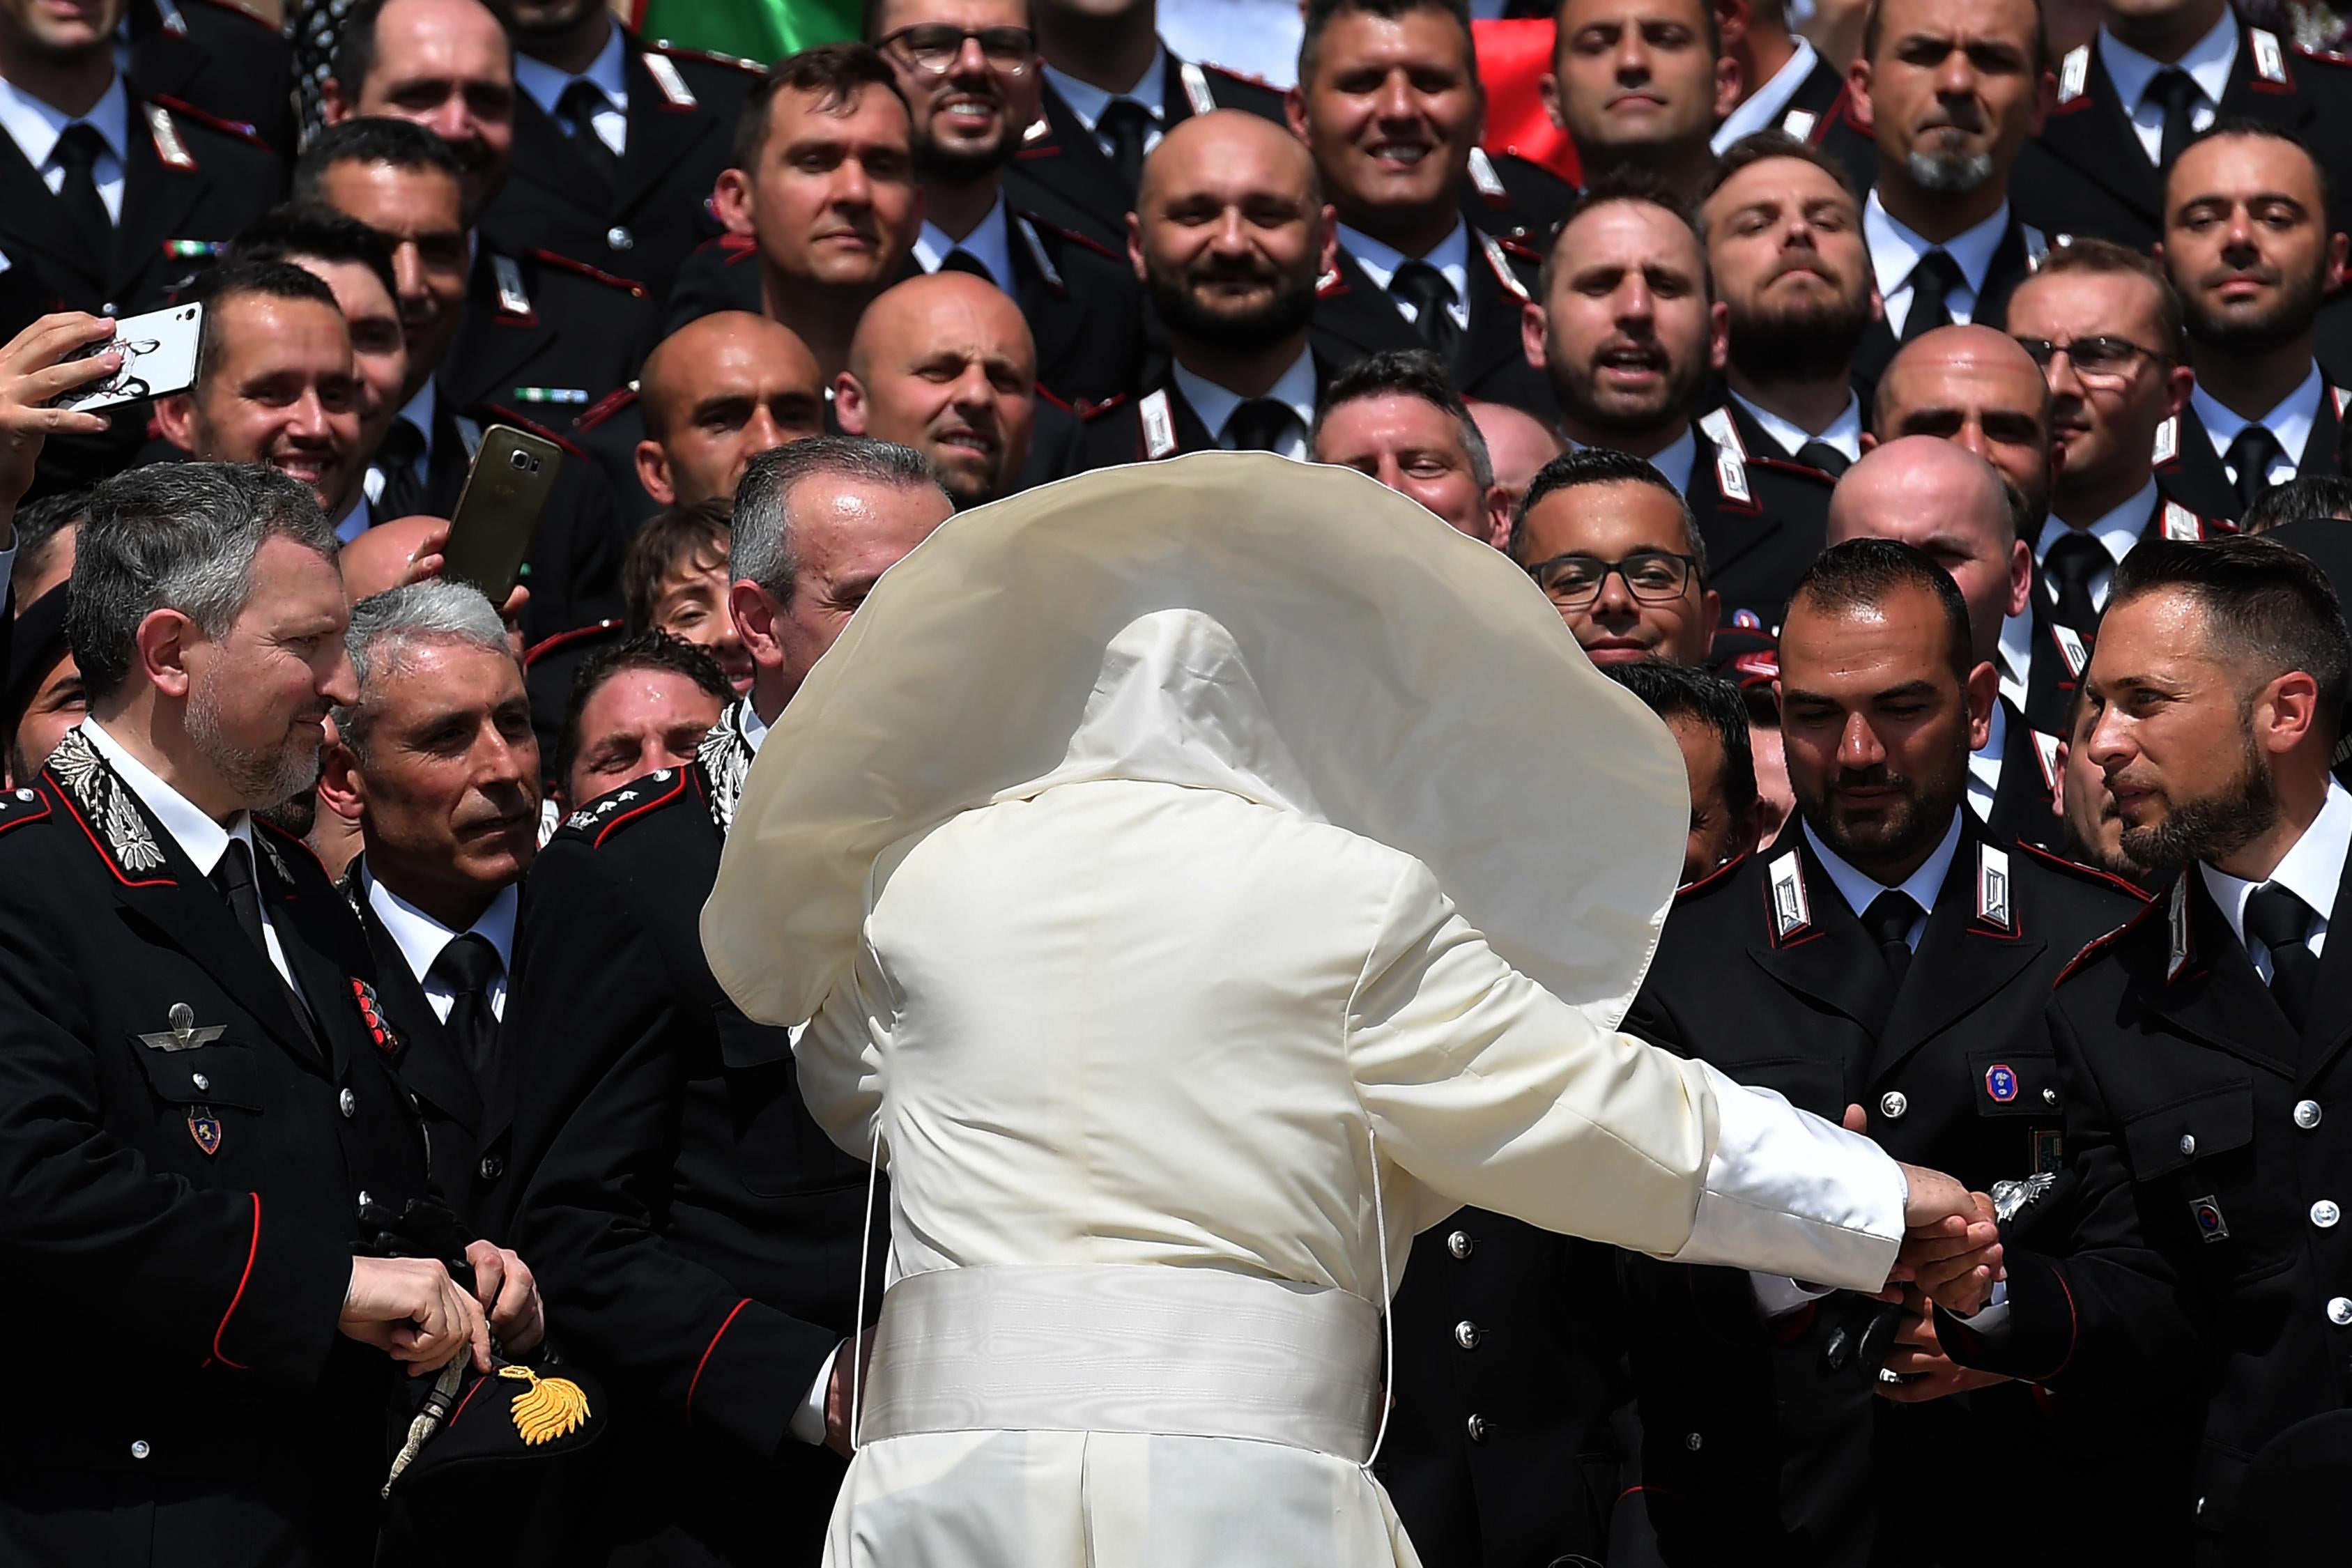 Pope Francis, seen from behind with his cape billowing in the wind, greets a large group of uniformed Carabinieri.